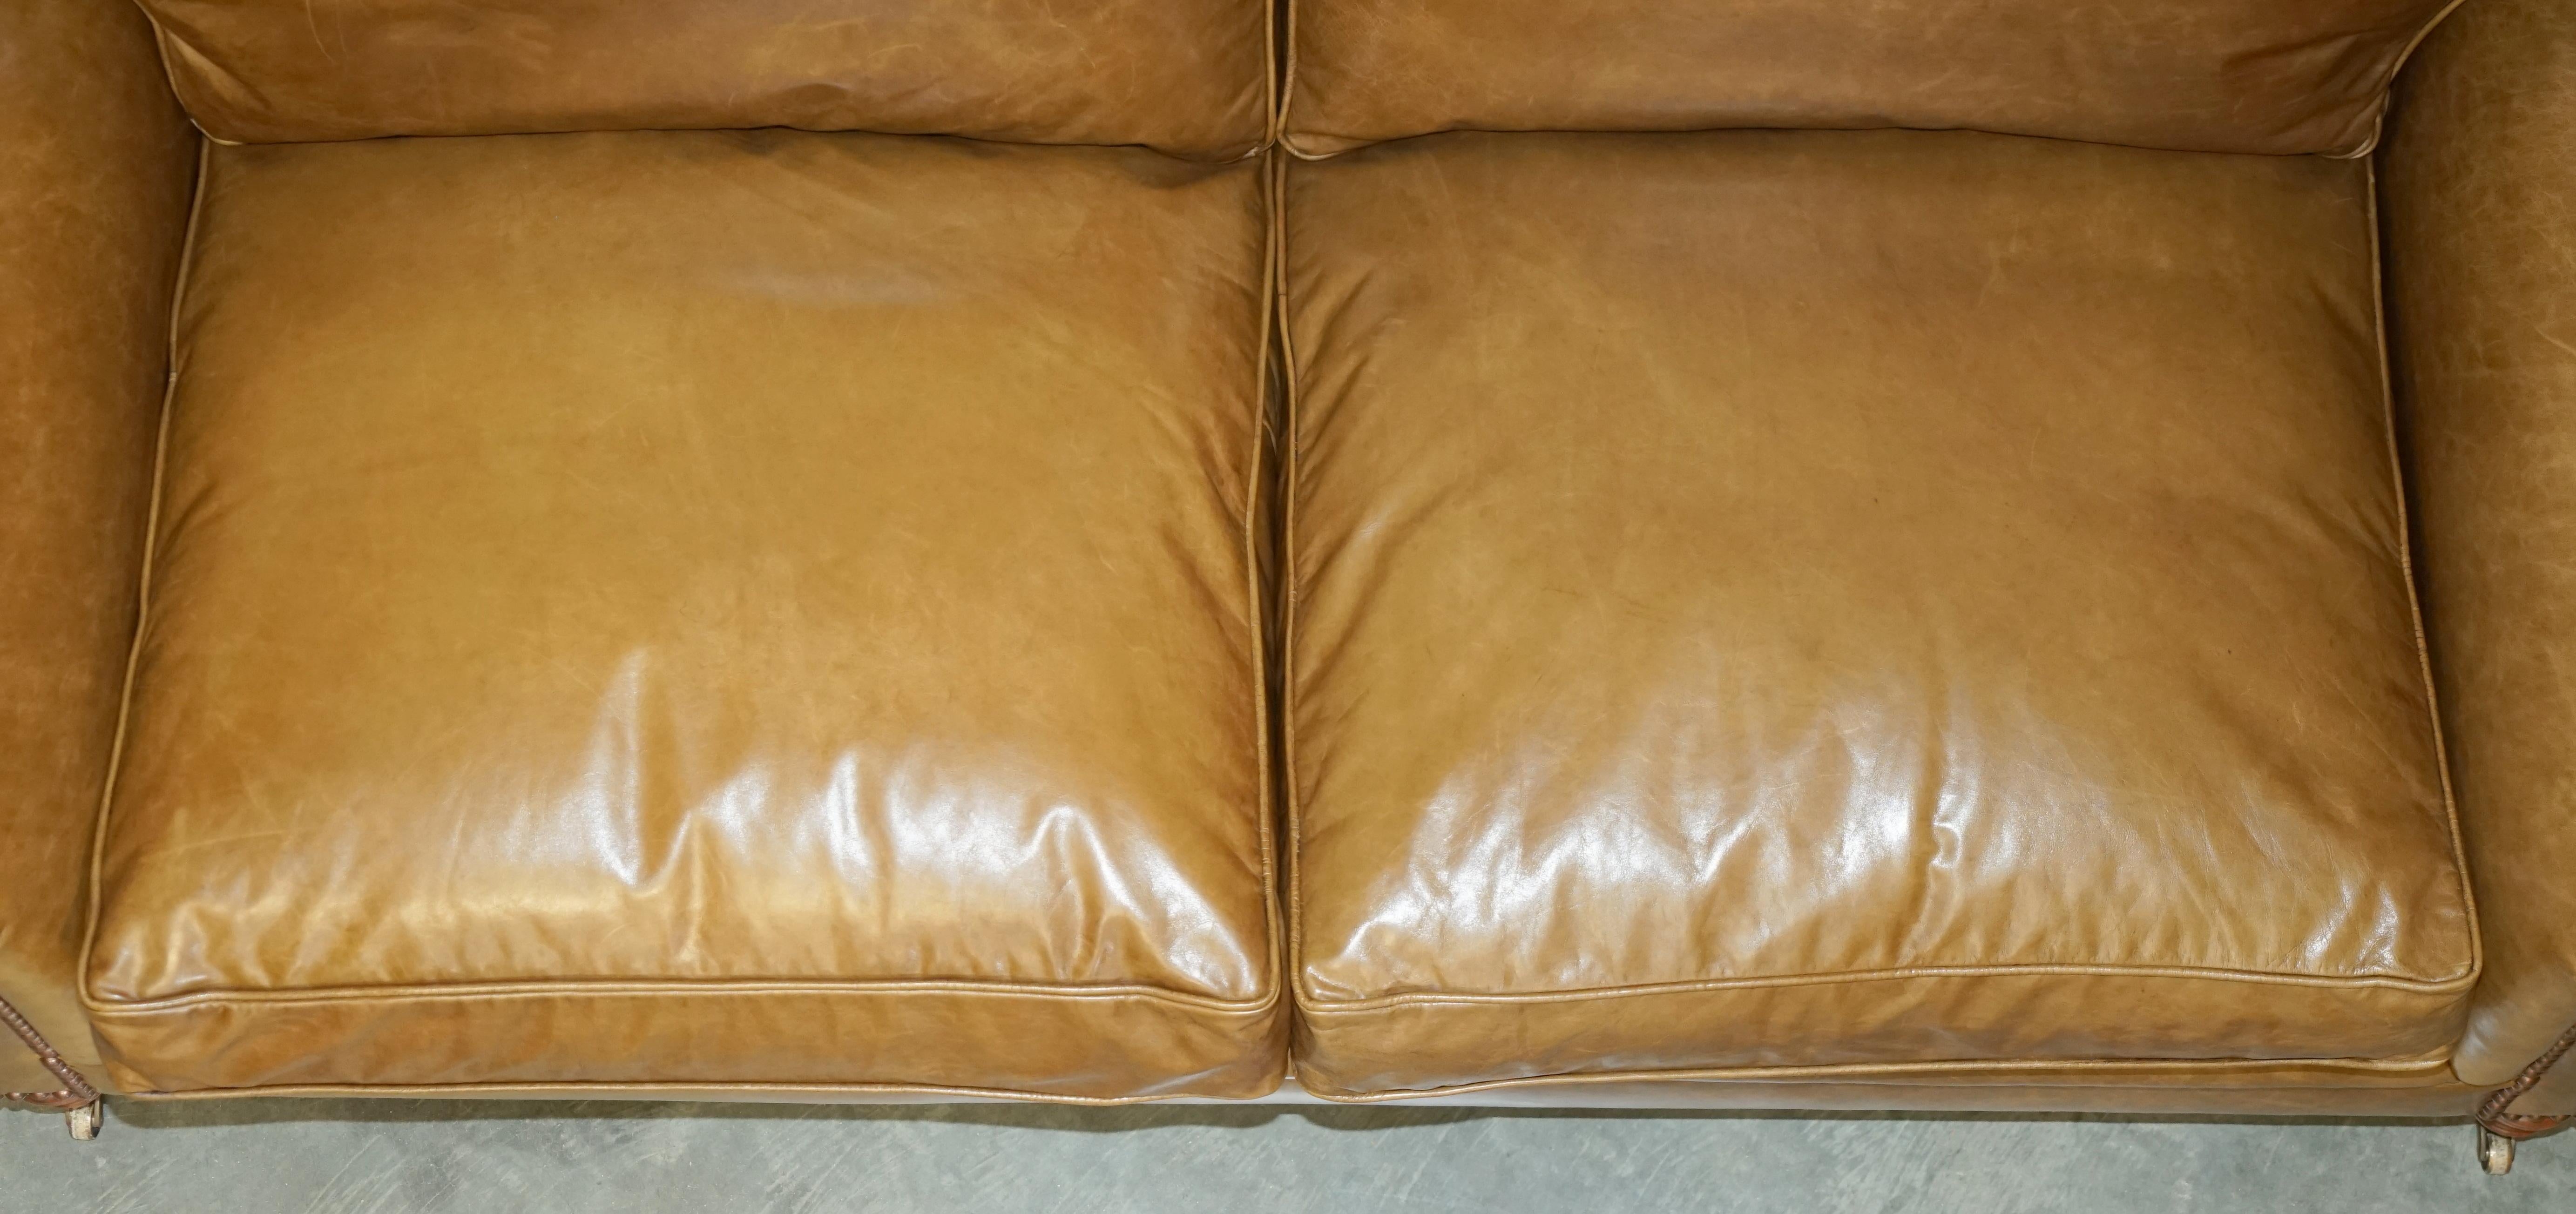 LOVELY GEORGE SMITH SCROLL CUSHiON BACK BROWN LEATHER SOFA en vente 8